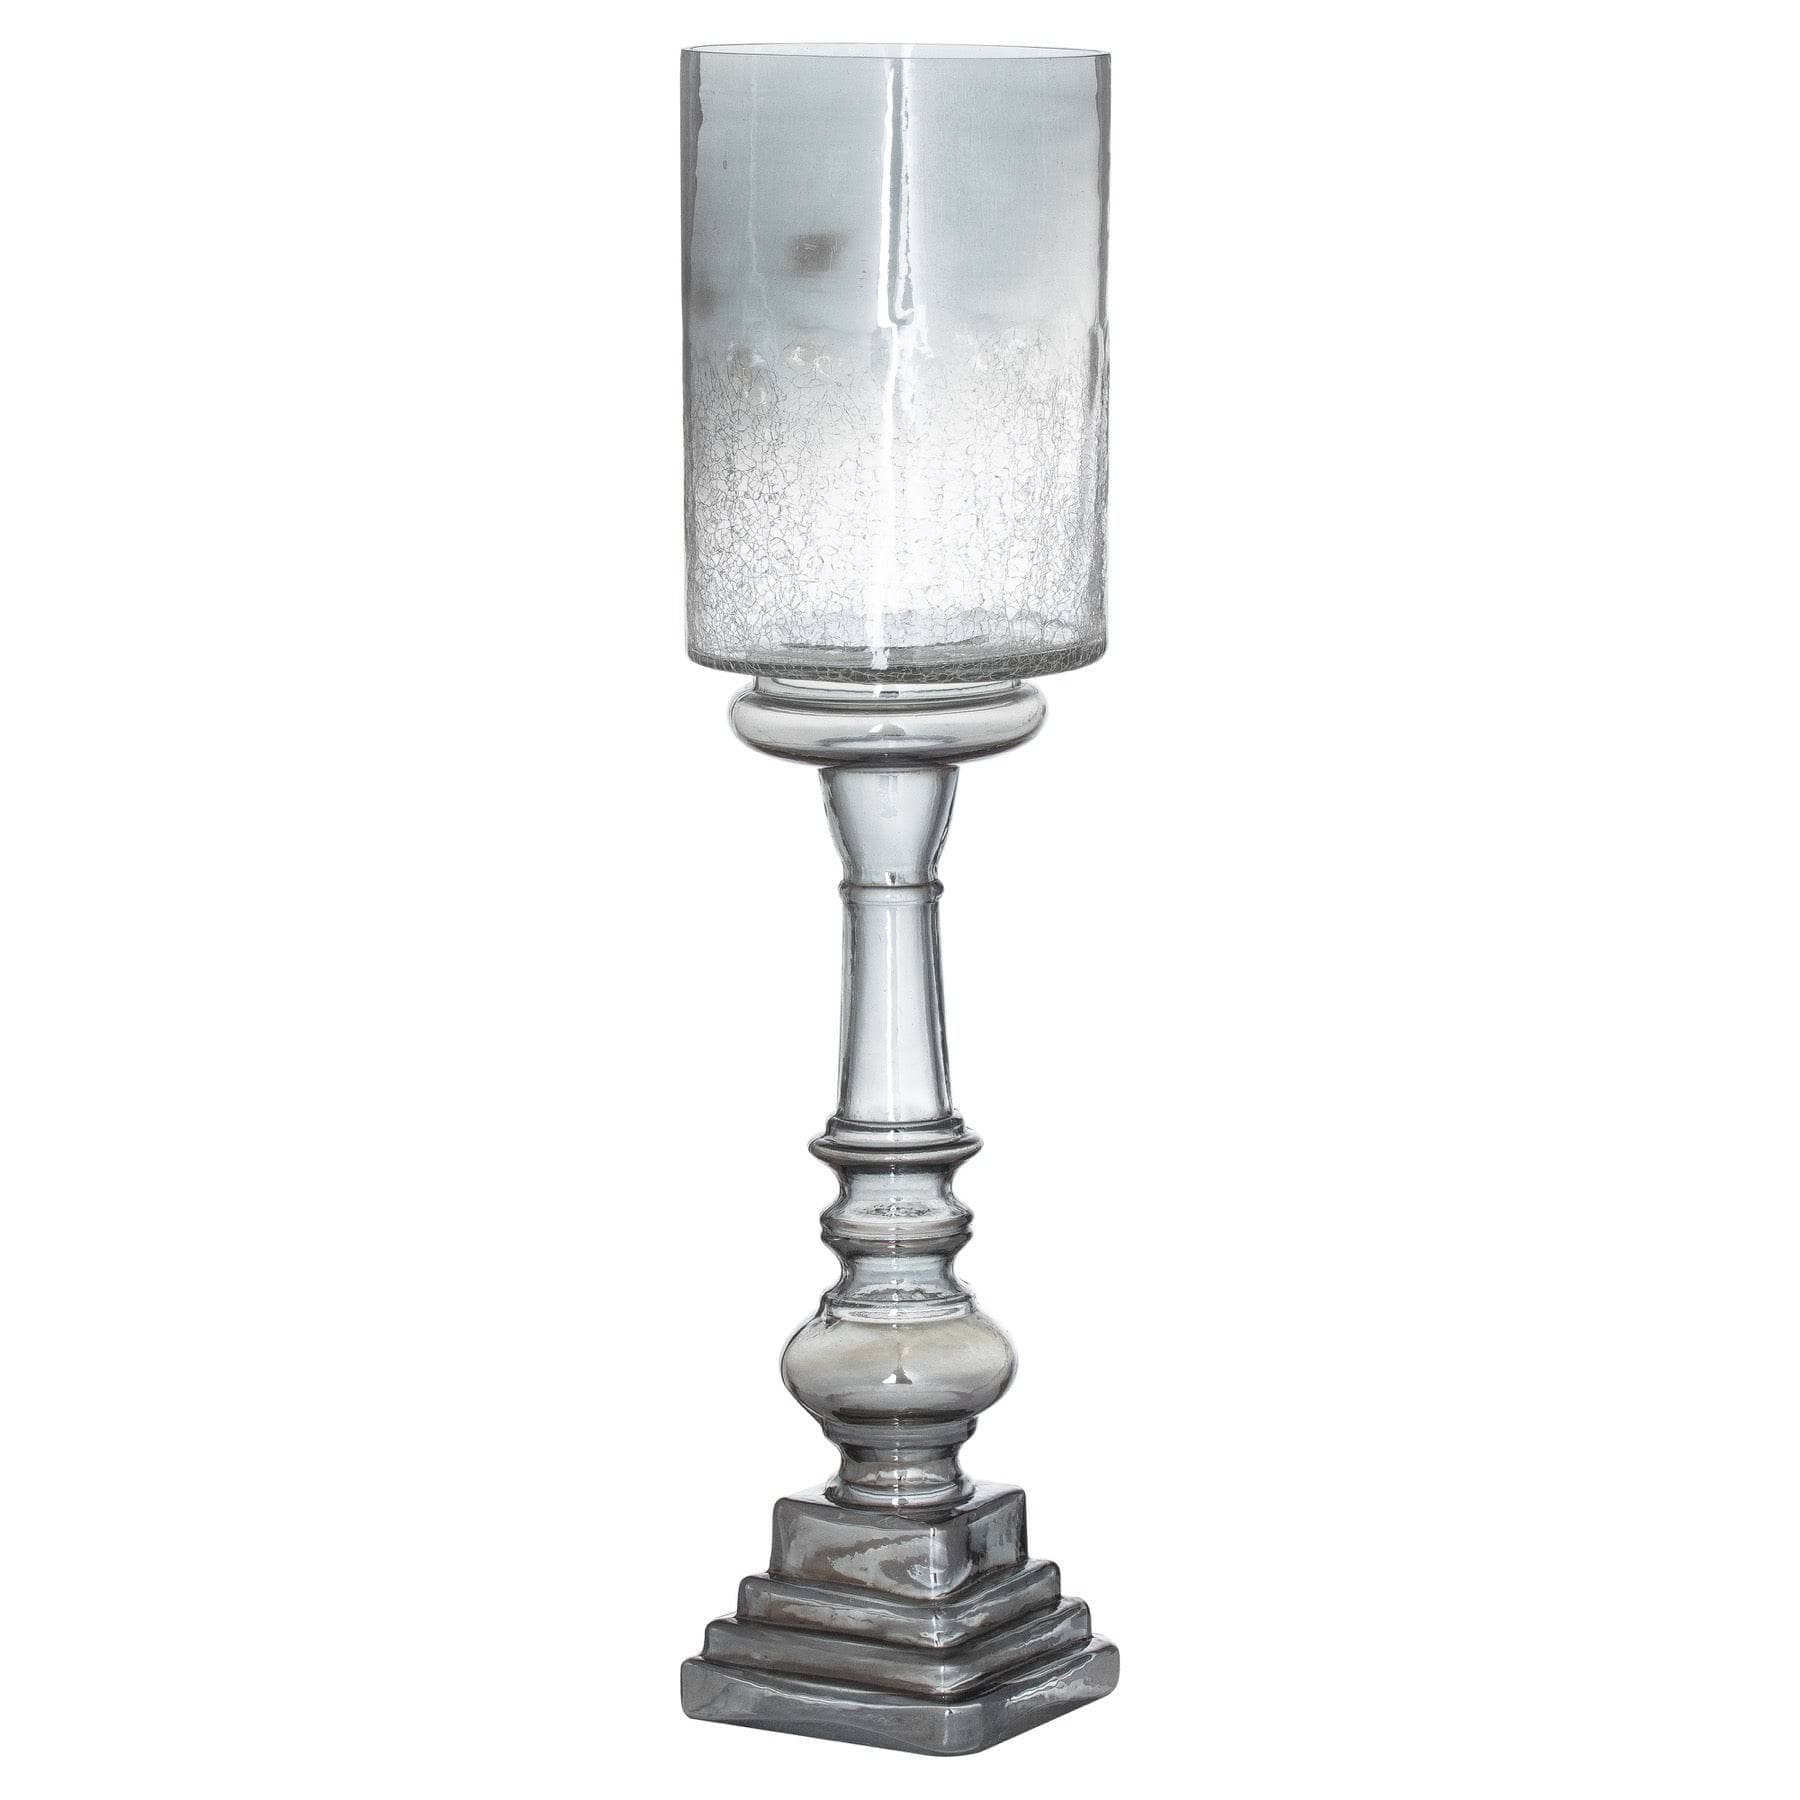 Homeware  -  Smoked Glass Pillar Candle Holder Silver  -  60001139